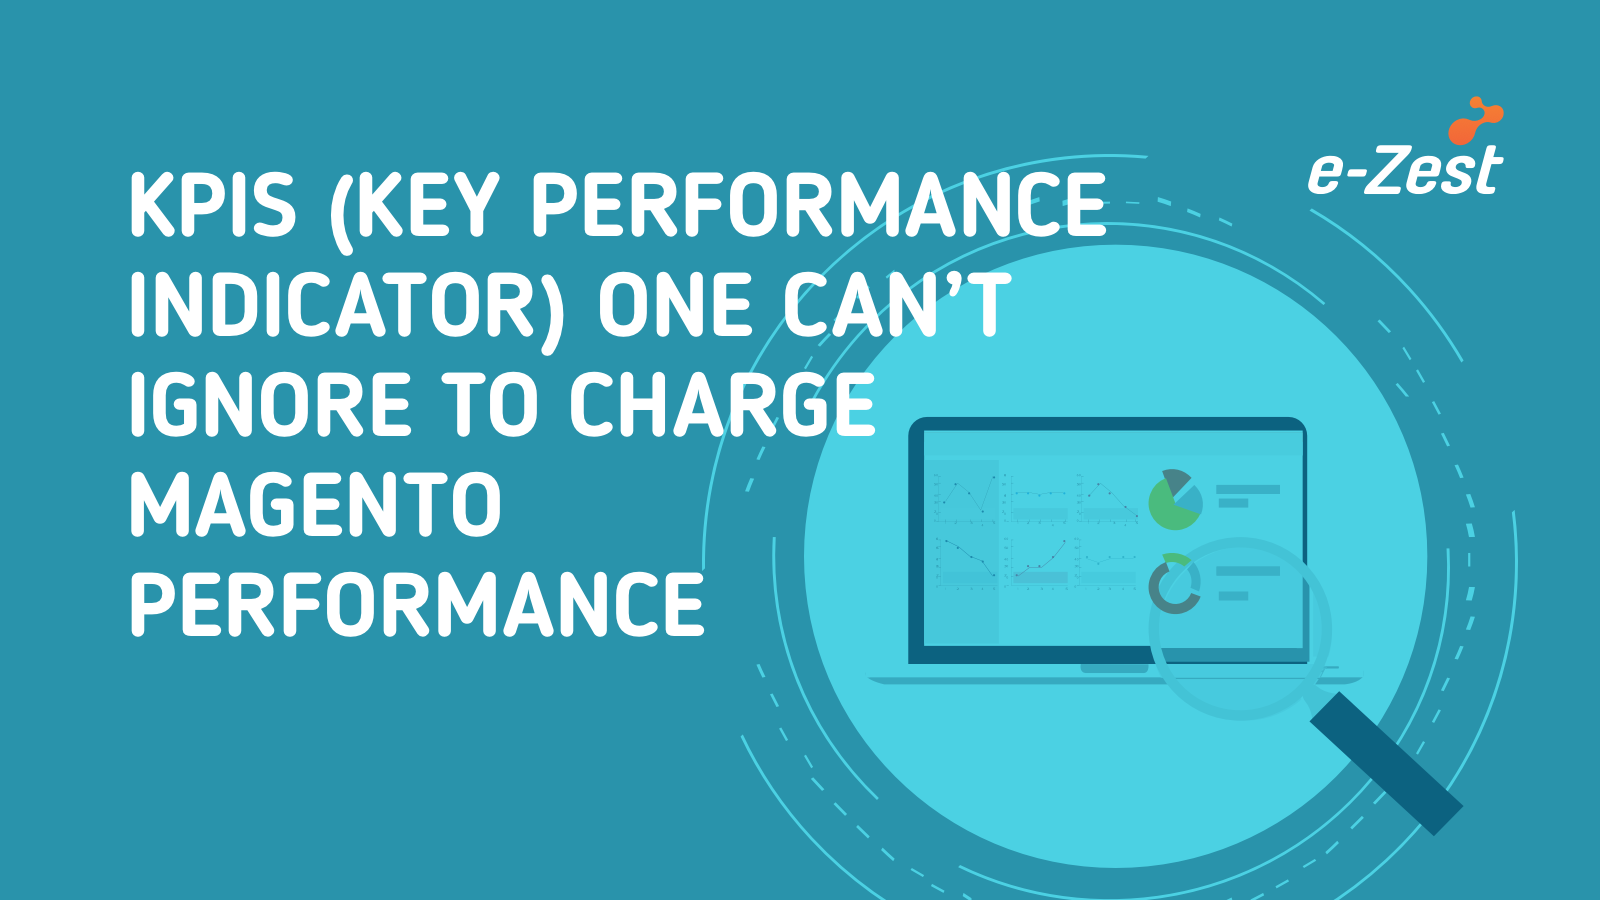 KPIs (Key Performance Indicator) one can’t ignore to charge Magento performance